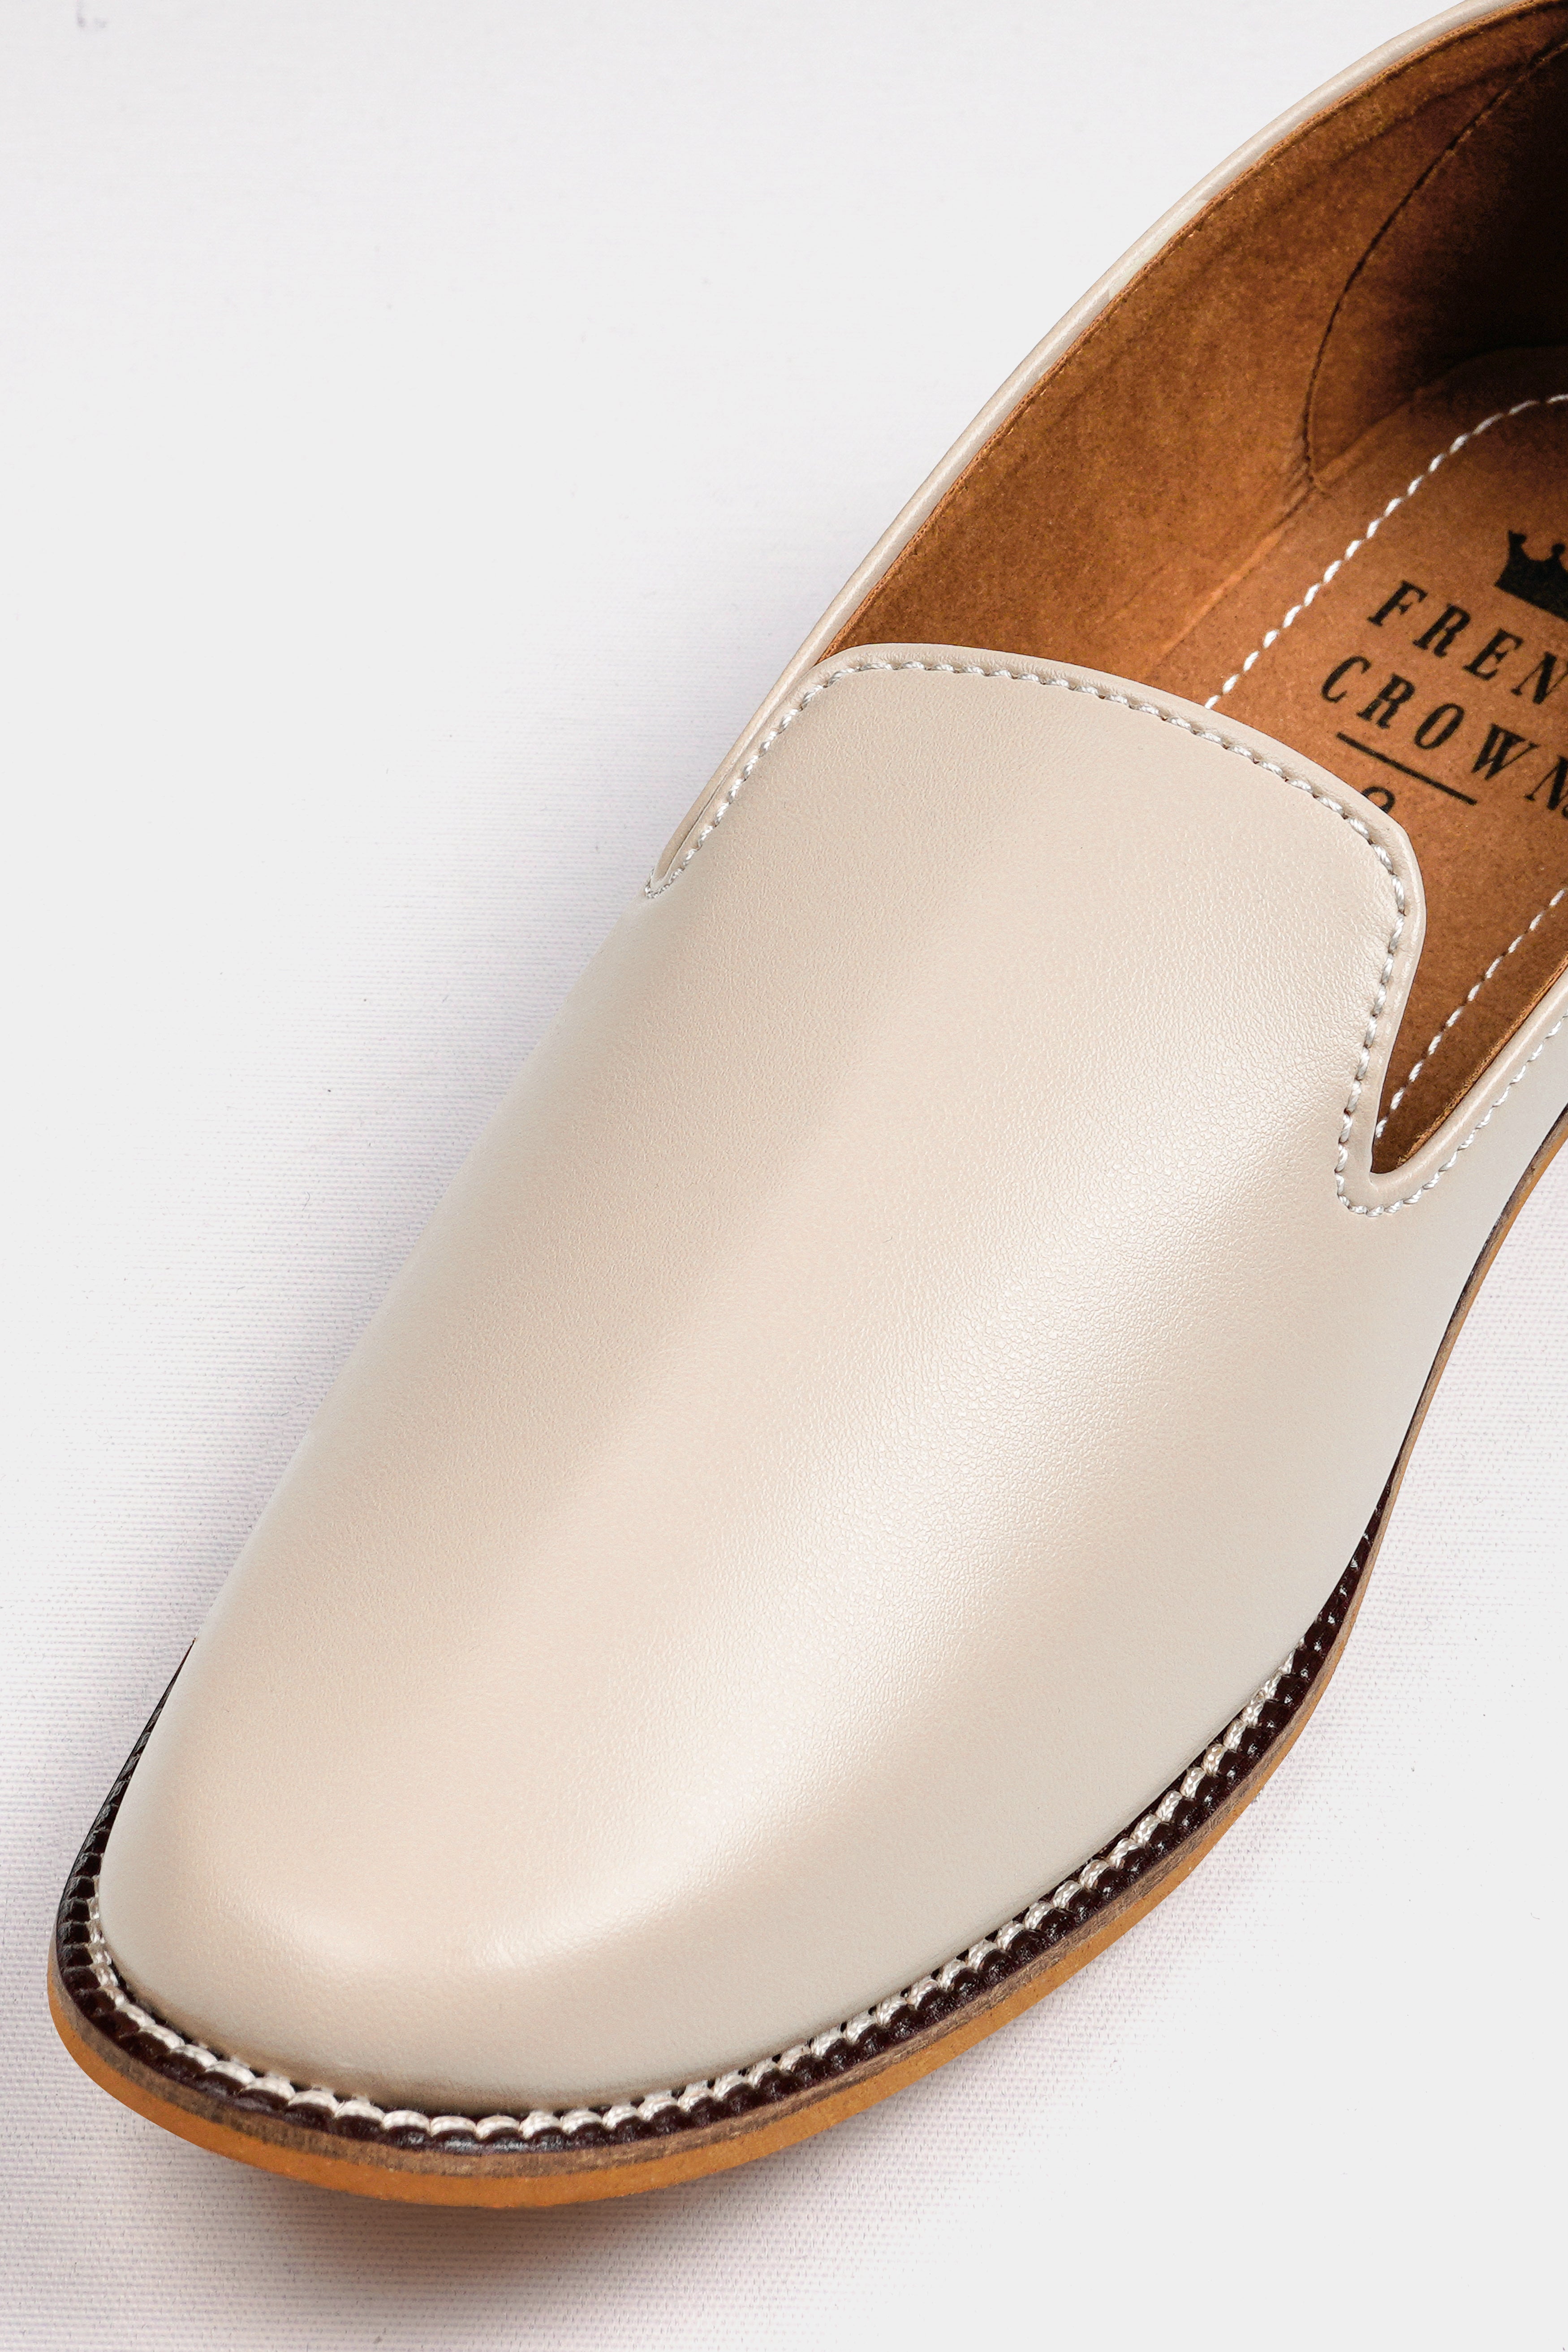 Cream Vegan Leather Hand Stitched Mojri Slip-On Shoes FT142-6, FT142-7, FT142-8, FT142-9, FT142-10, FT142-11